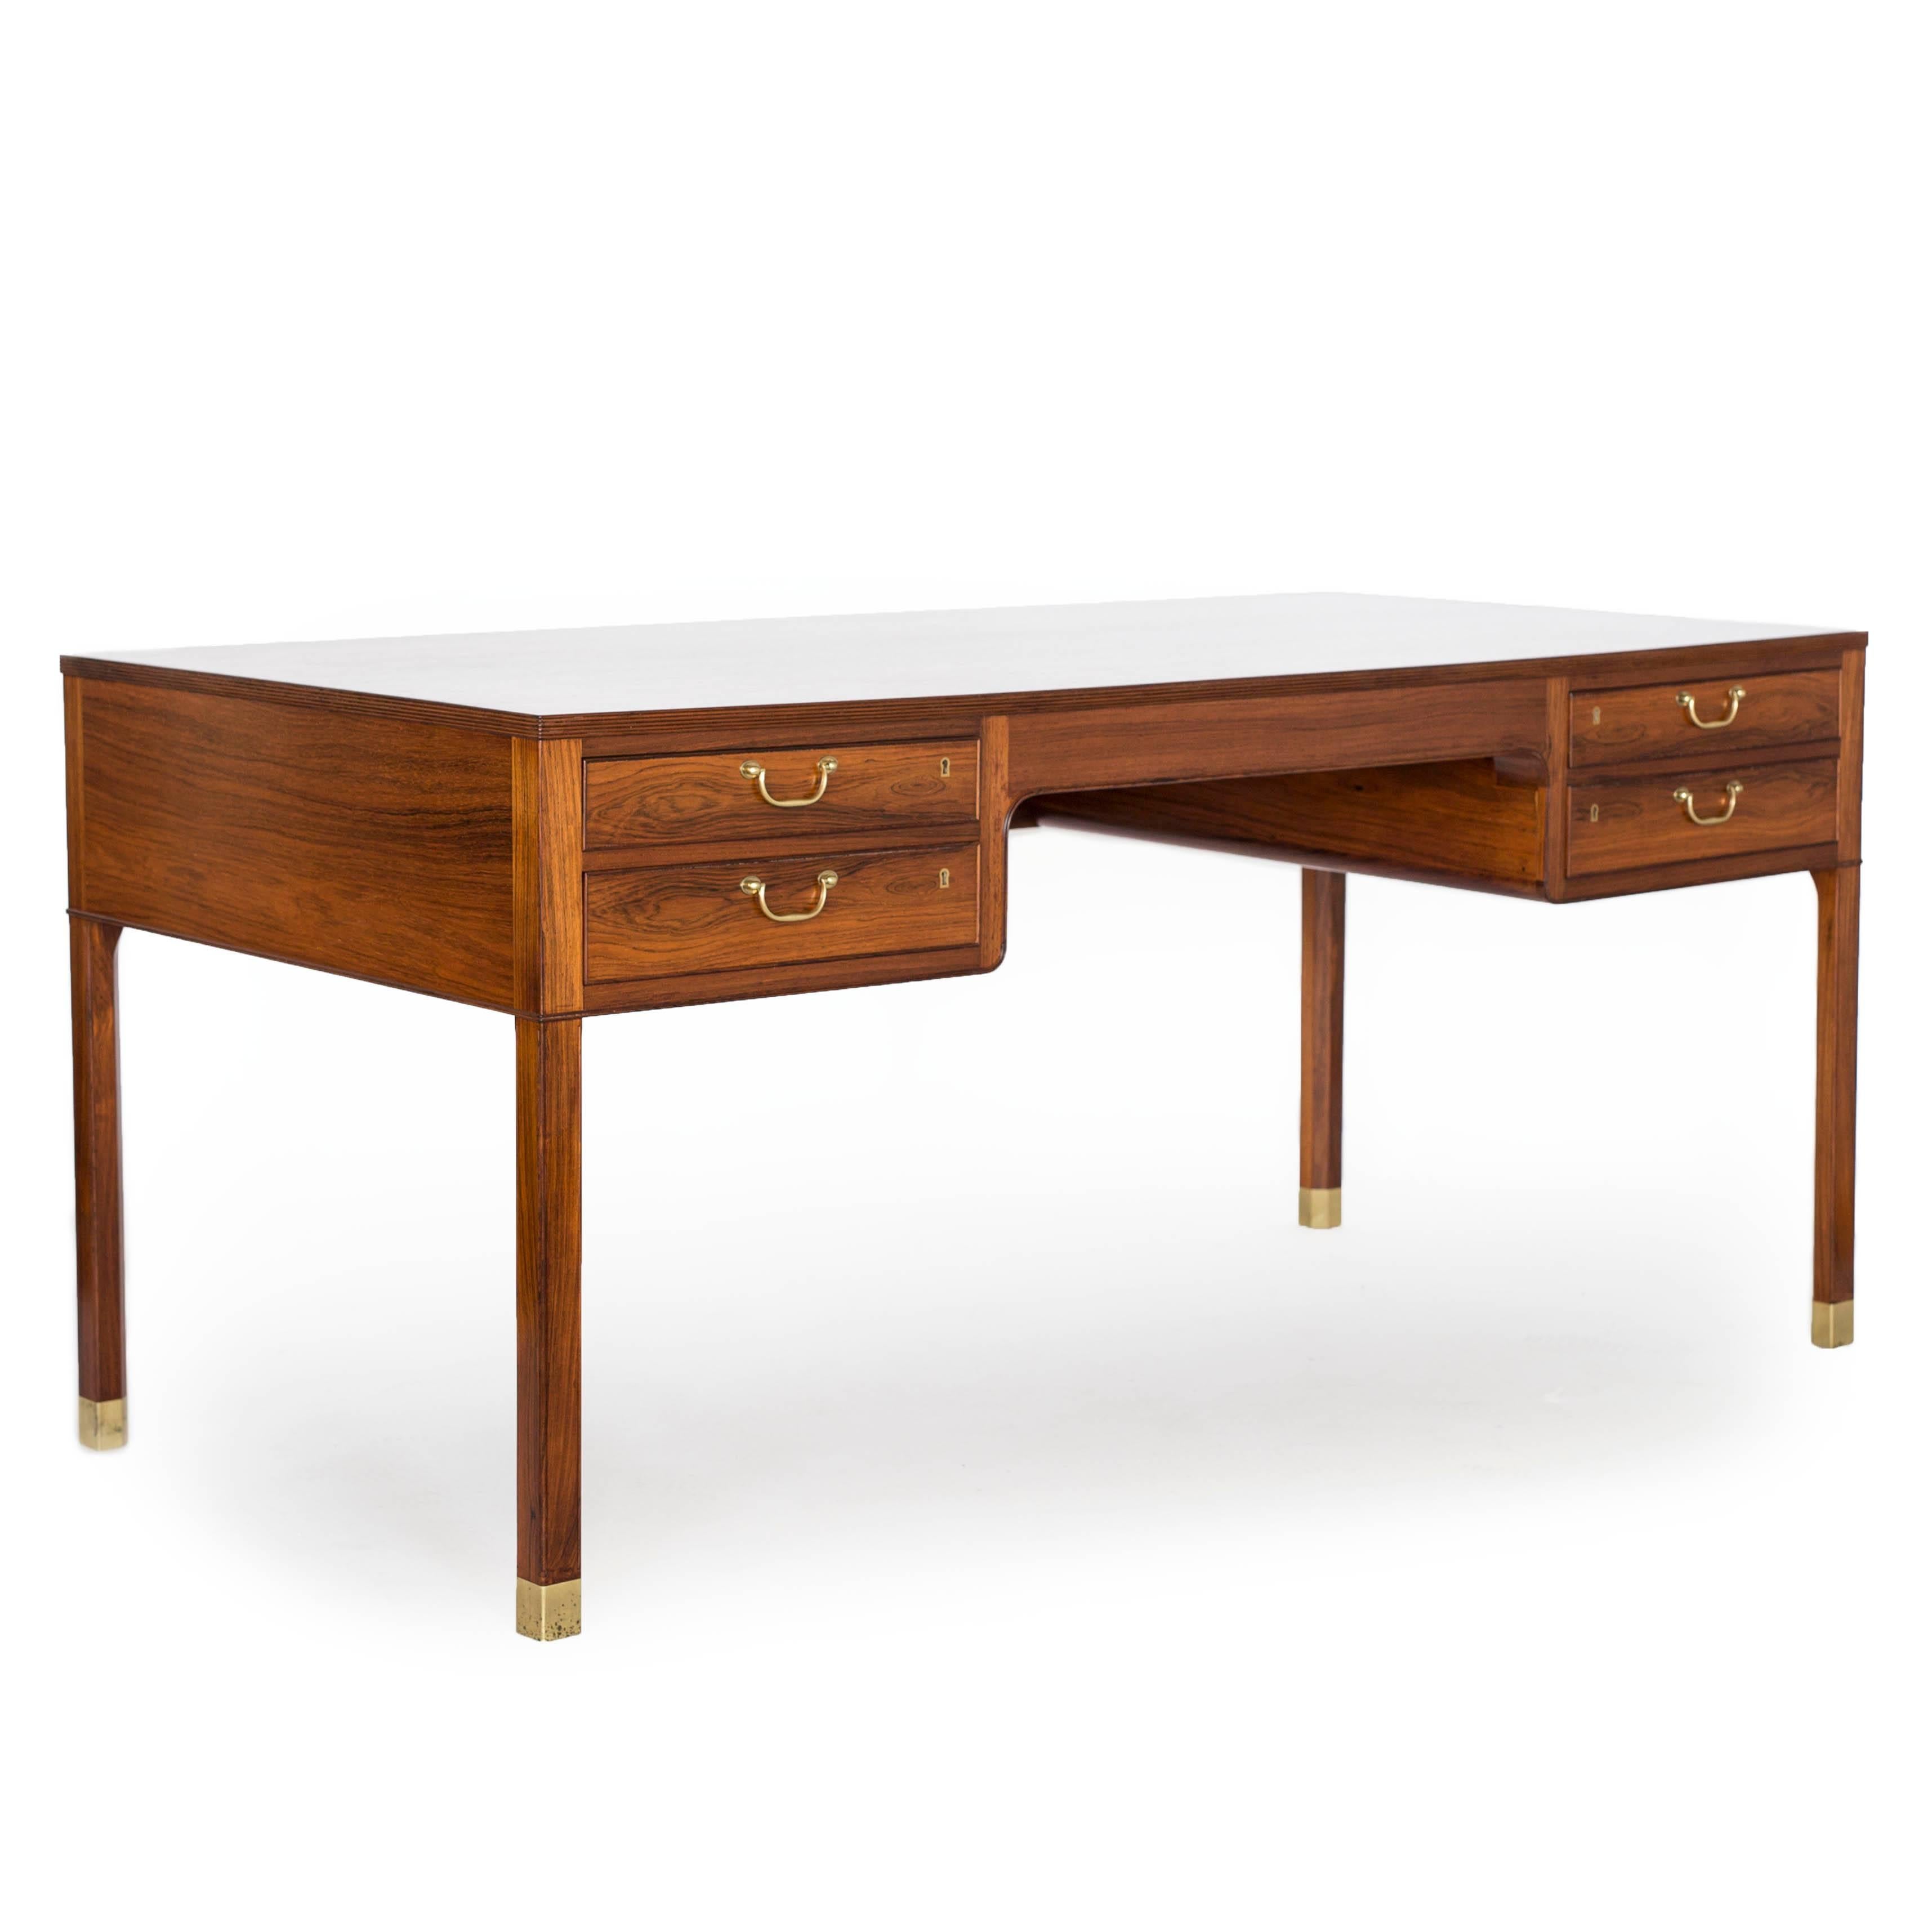 A freestanding Ole Wanscher Brazilian rosewood desk with brass fittings and profiled front. 

Designed 1950s, made by cabinetmaker A. J. Iversen, Denmark. 
Very fine condition.